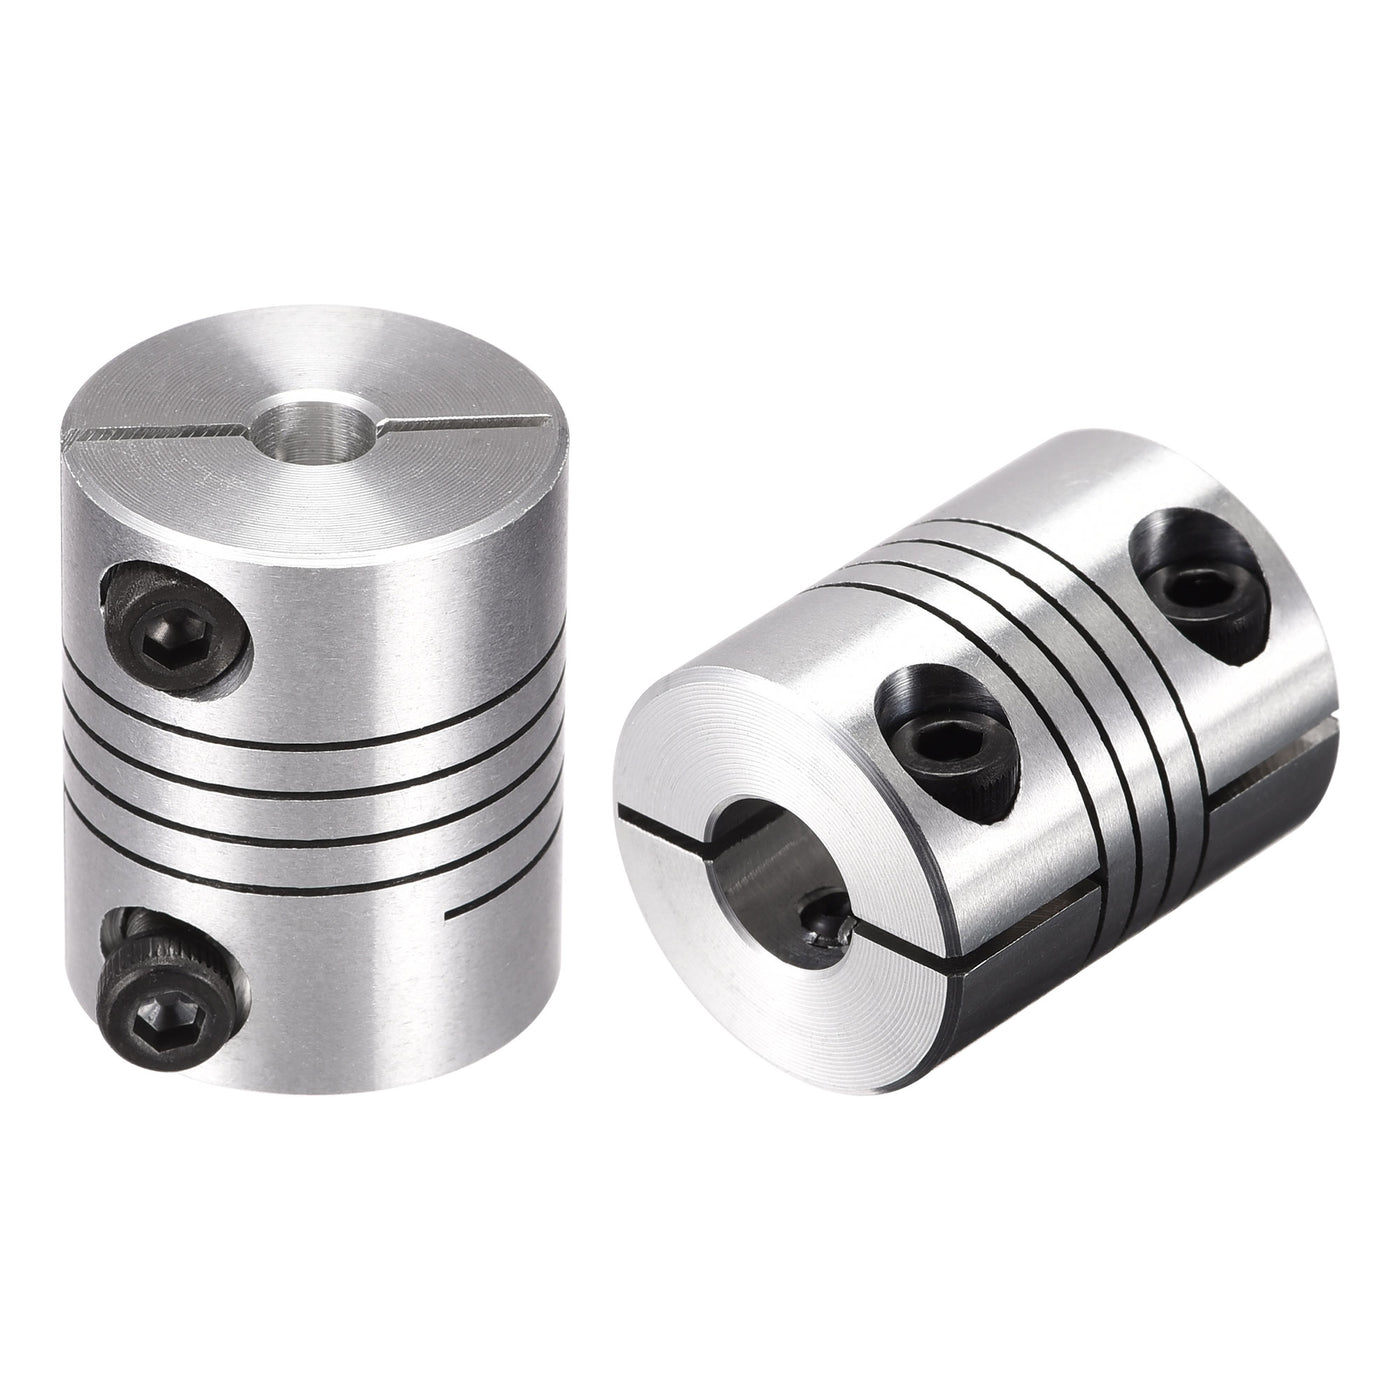 uxcell Uxcell 2PCS Motor Shaft 5mm to 8mm Helical Beam Coupler Coupling 20mm Dia 25mm Length